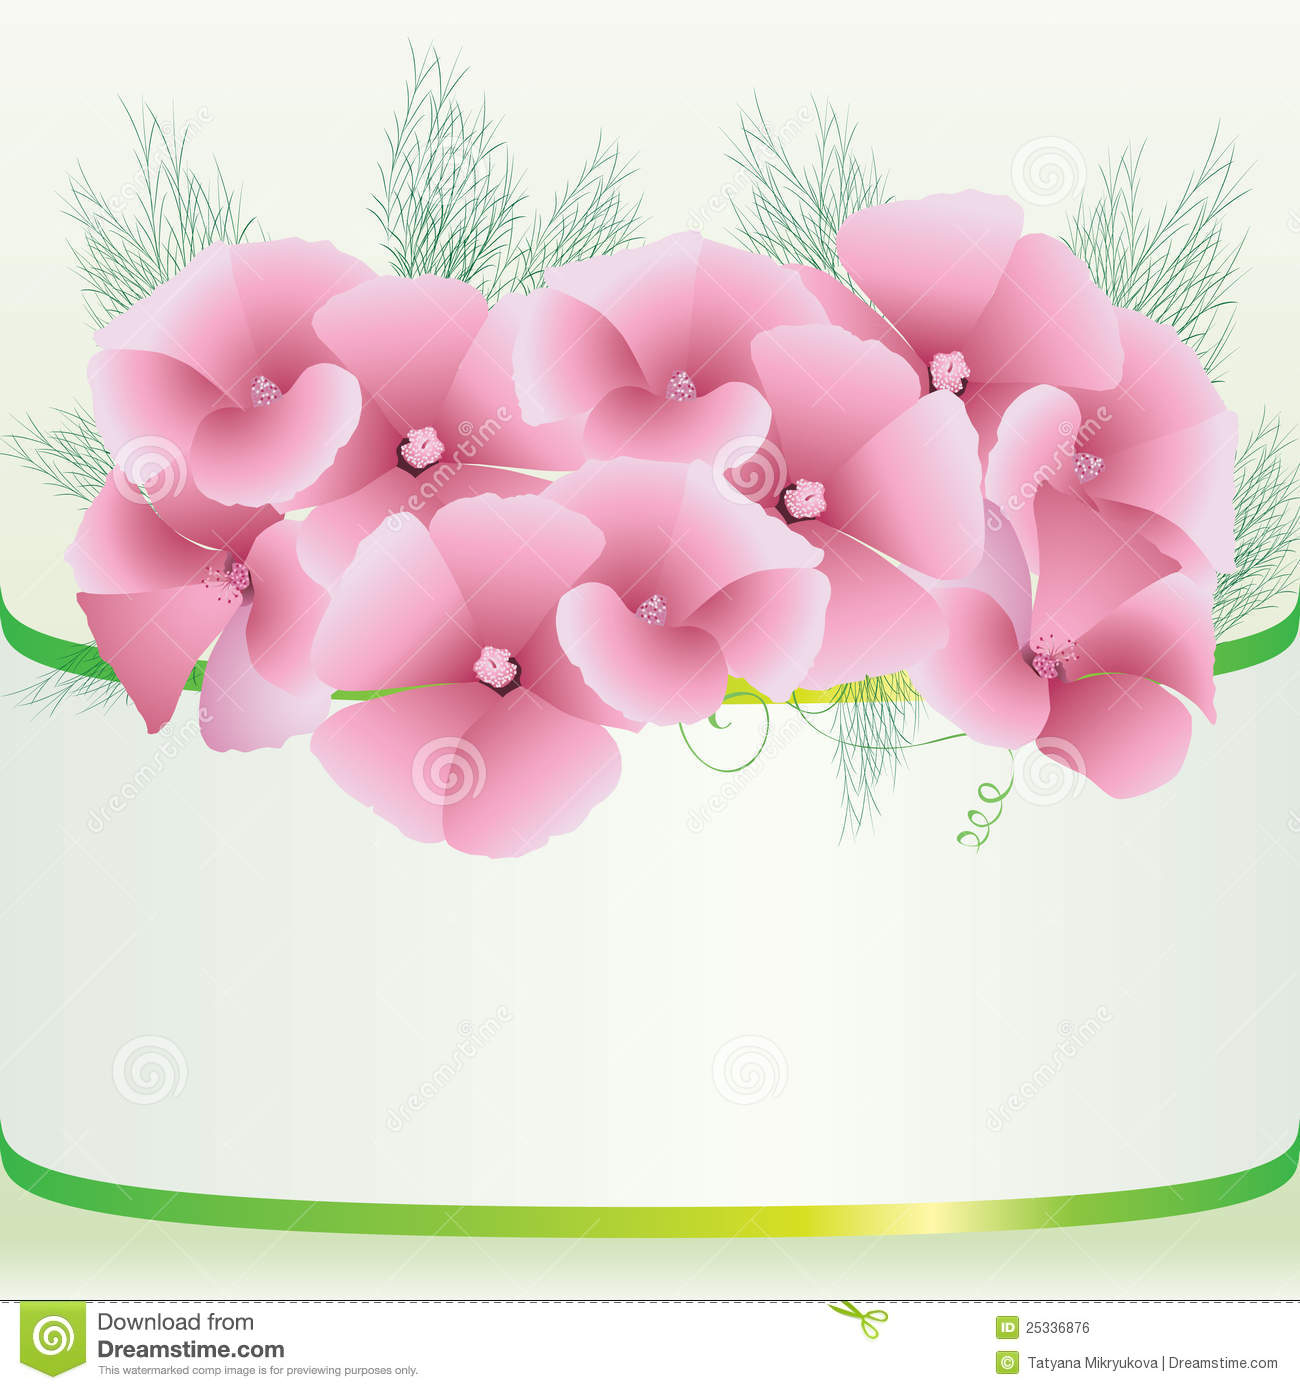 Cute Light Pink Backgrounds Images Pictures   Becuo